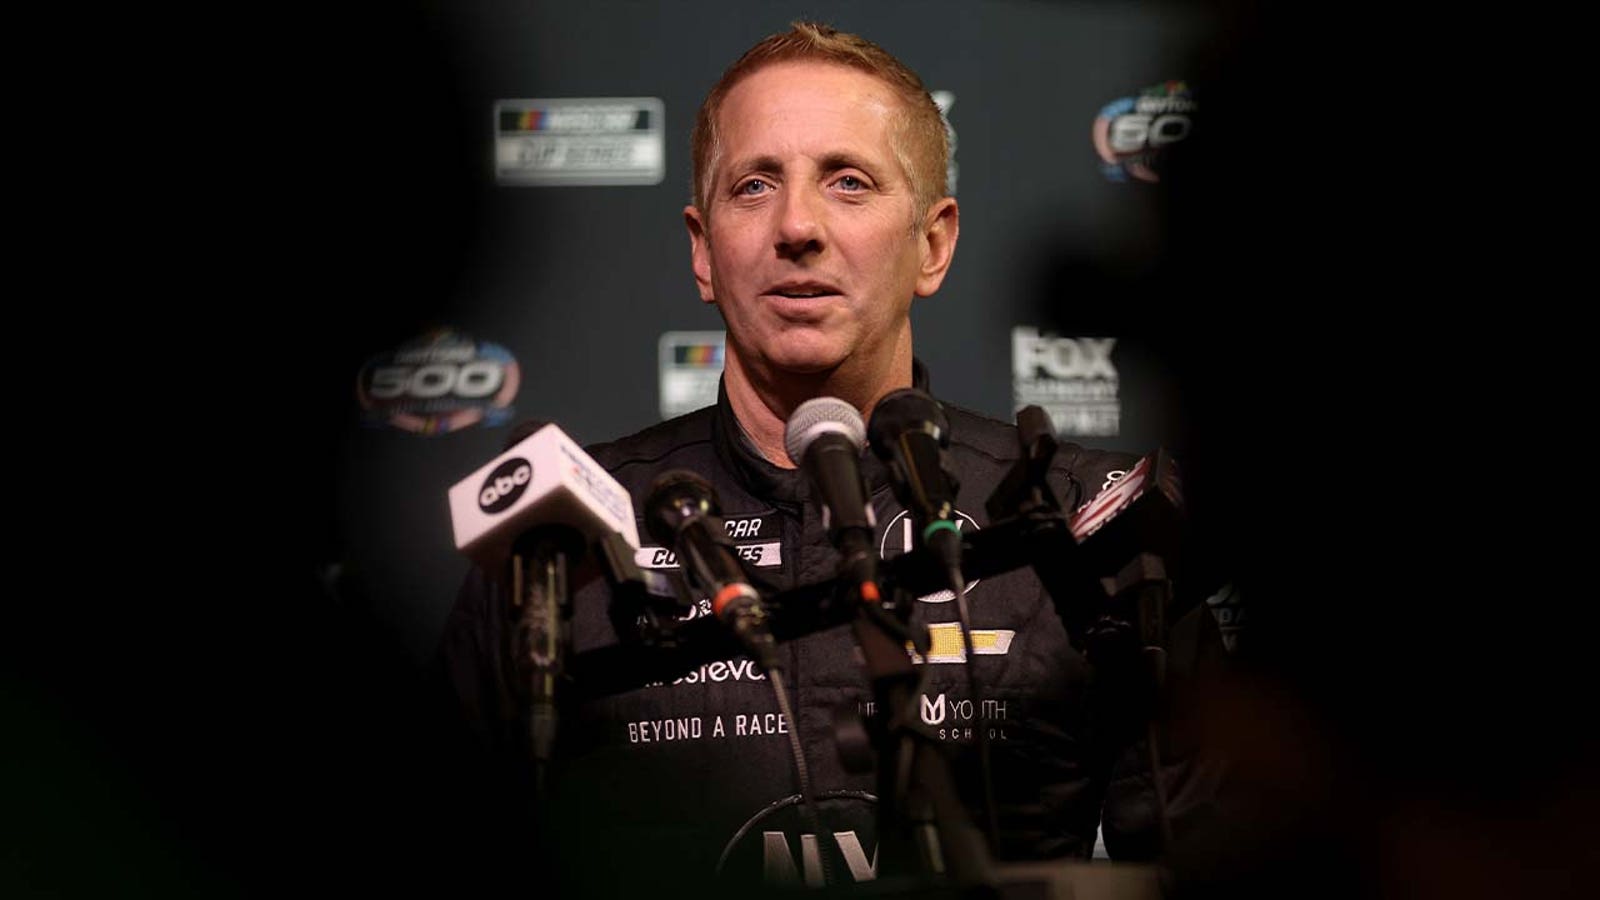 Greg Biffle on why he is nervous about the Daytona 500